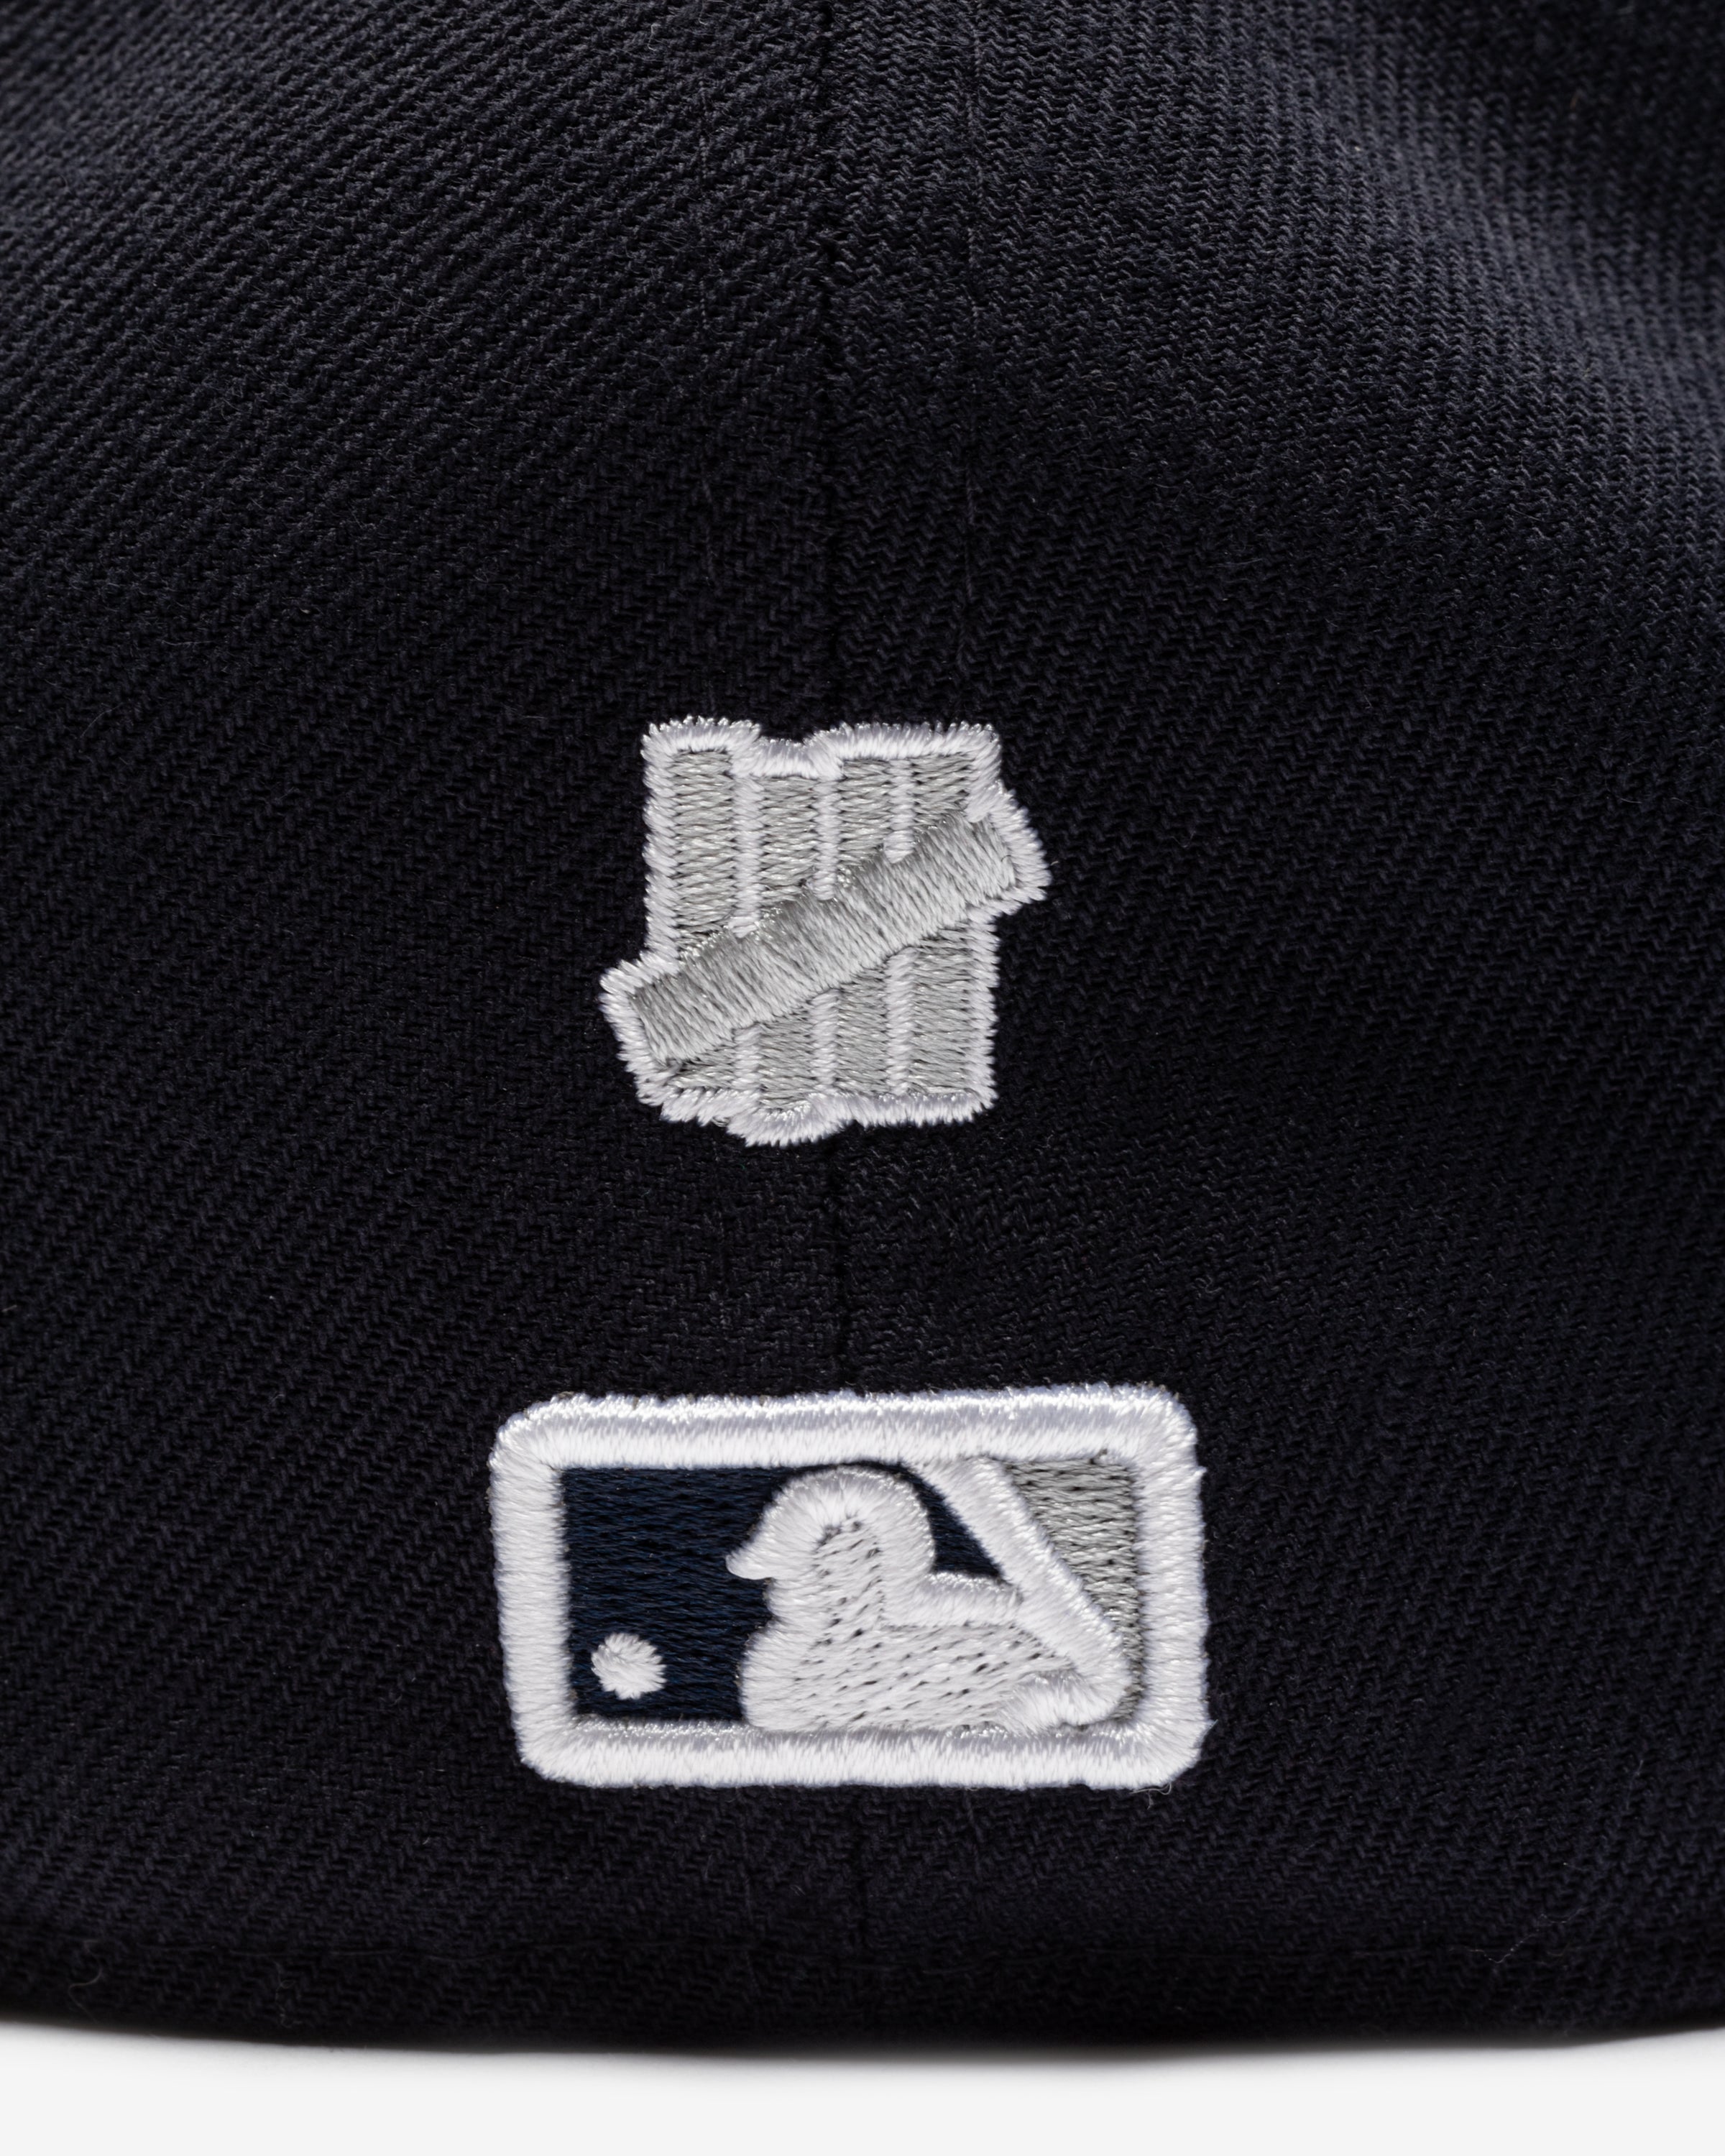 UNDEFEATED X NE X MLB FITTED - NEW YORK YANKEES